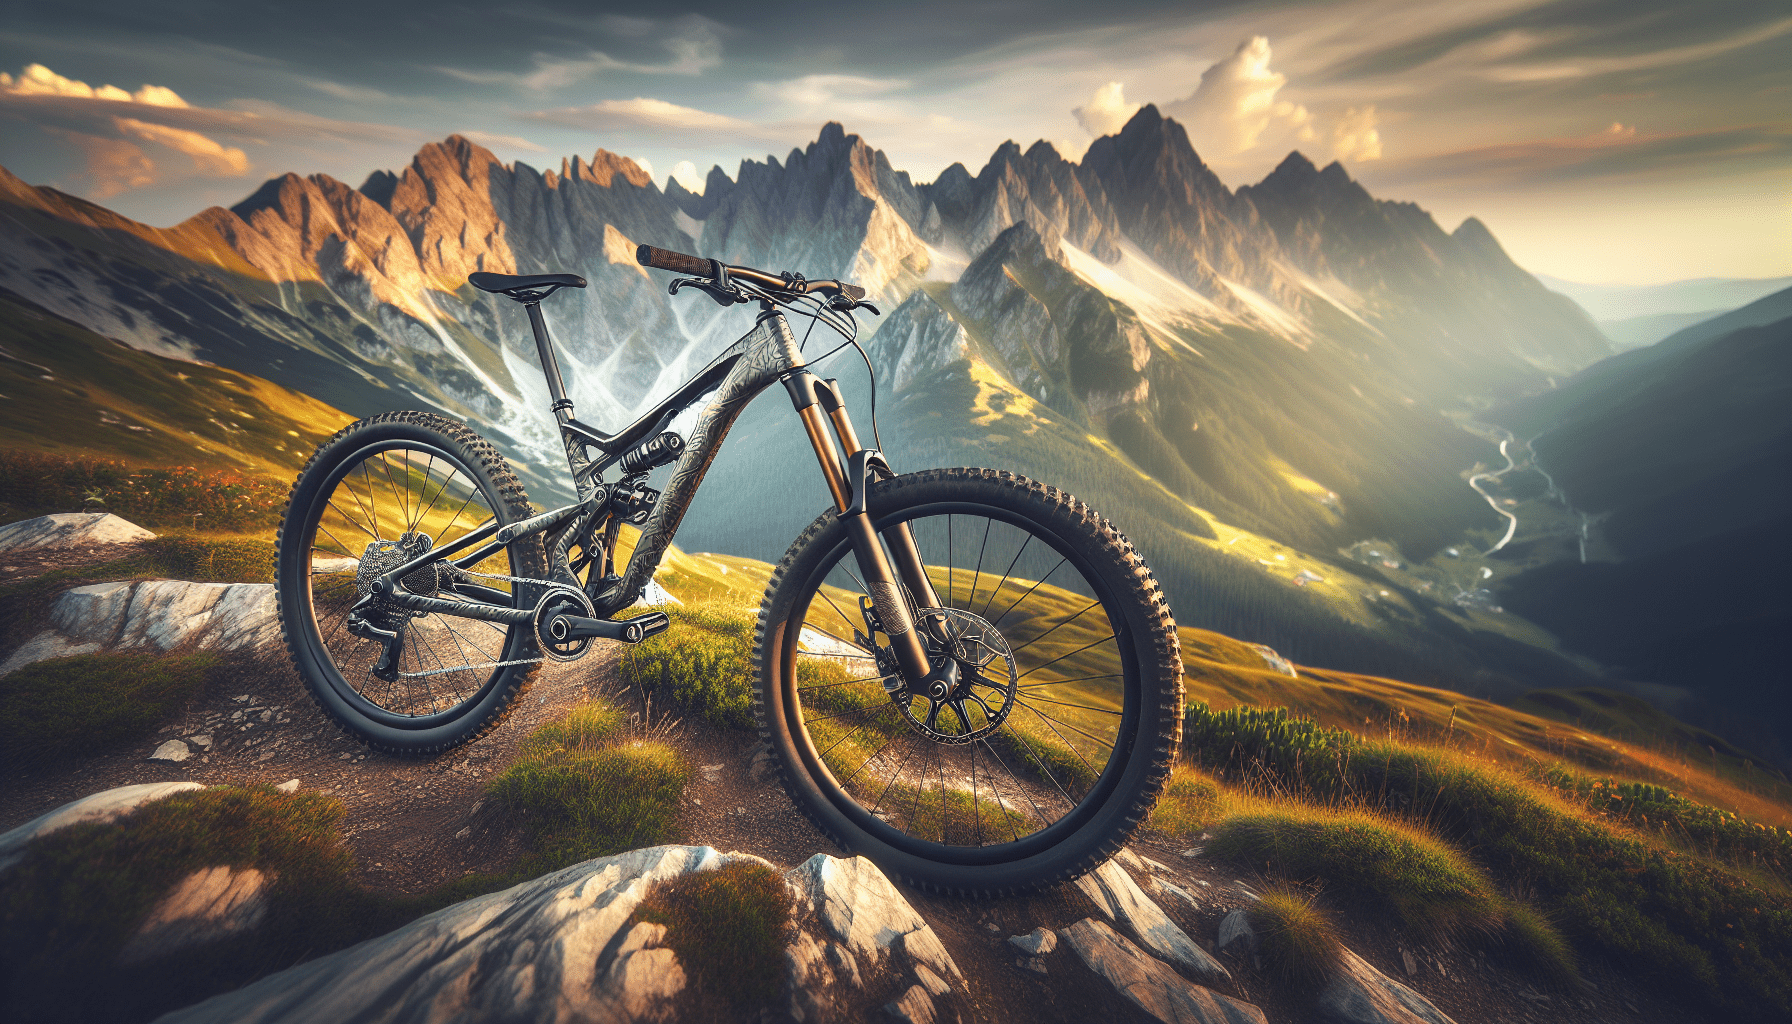 Essential Gear: How To Choose The Perfect Off-Road Bike For Your Adventure